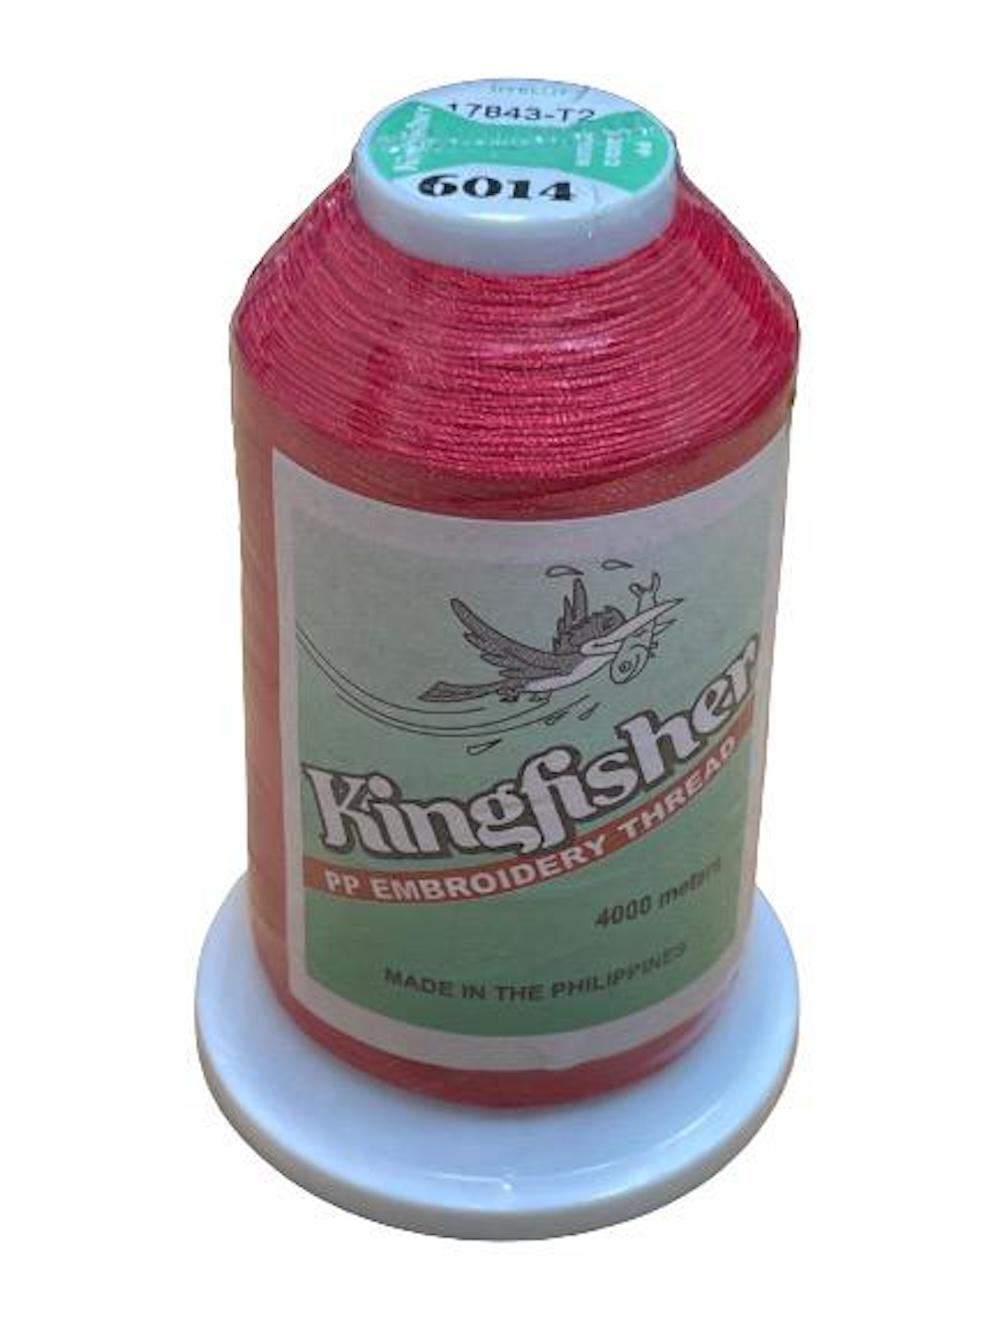 King Fisher Embroidery Thread 4000m 6014 - MY SEWING MALL